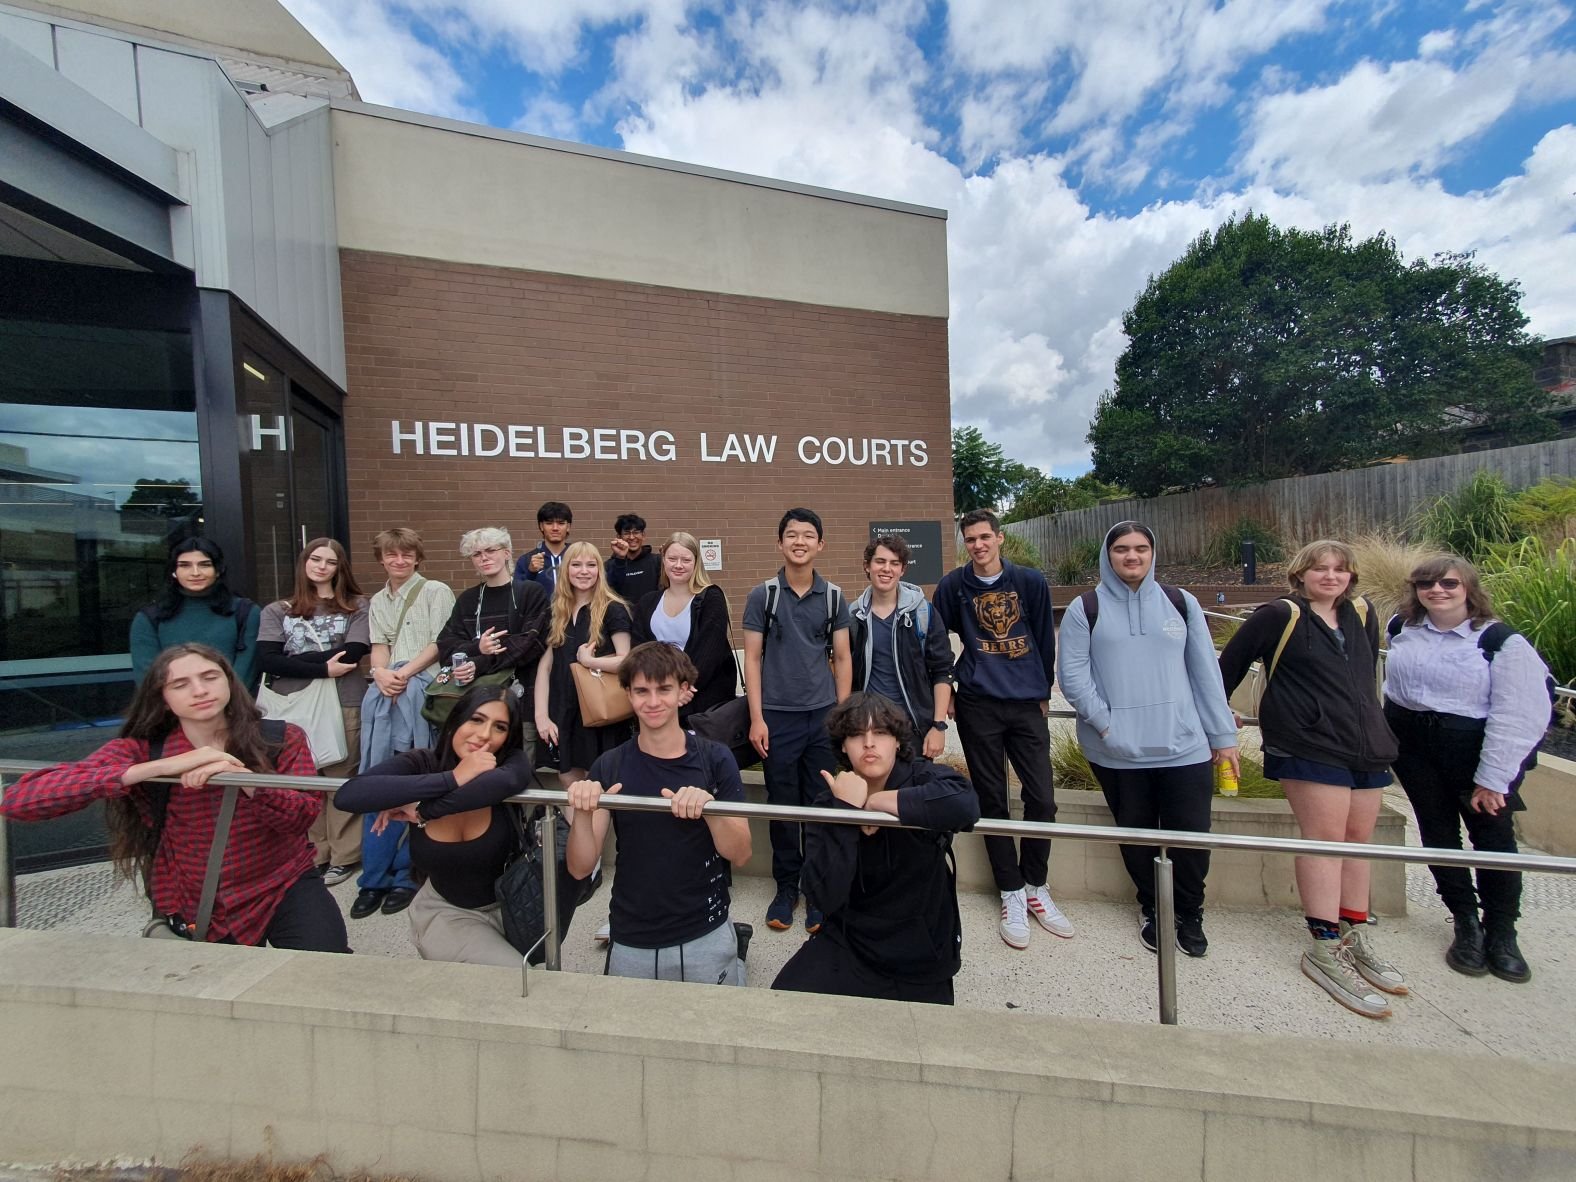 Legal Studies visited Heidelburg Courts to see how the justice system works, Will reflected: The visit to the magistrates court was an in-depth and engaging experience and showed our class the inner workings of a part of the legal system. We were abl